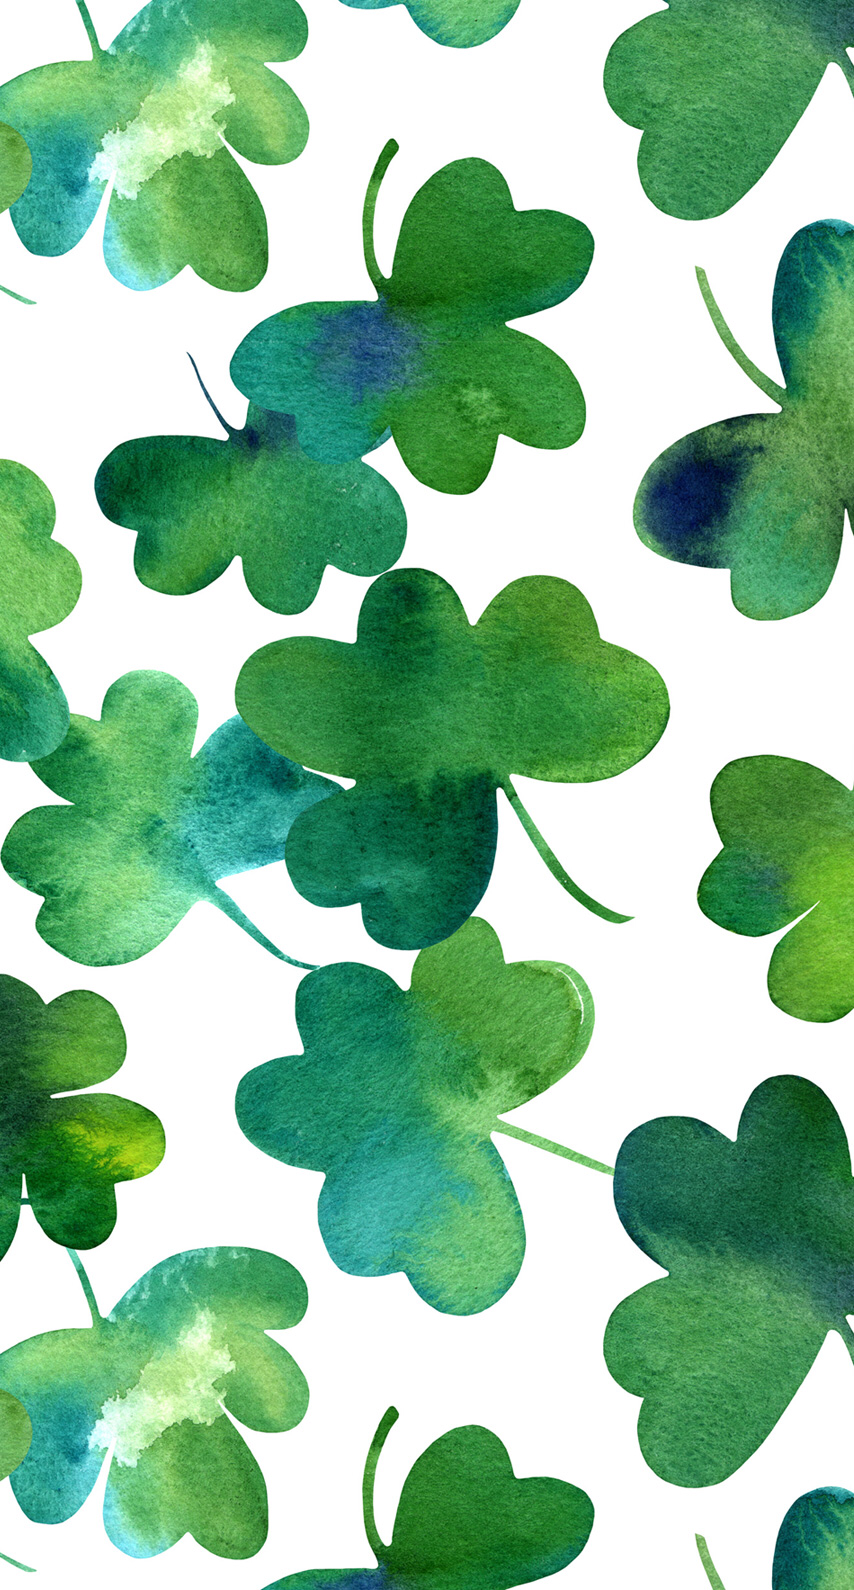 iPhone Wall: St. Patrick's Day tjn. St patricks day wallpaper, iPhone background pattern, Best flower wallpaper